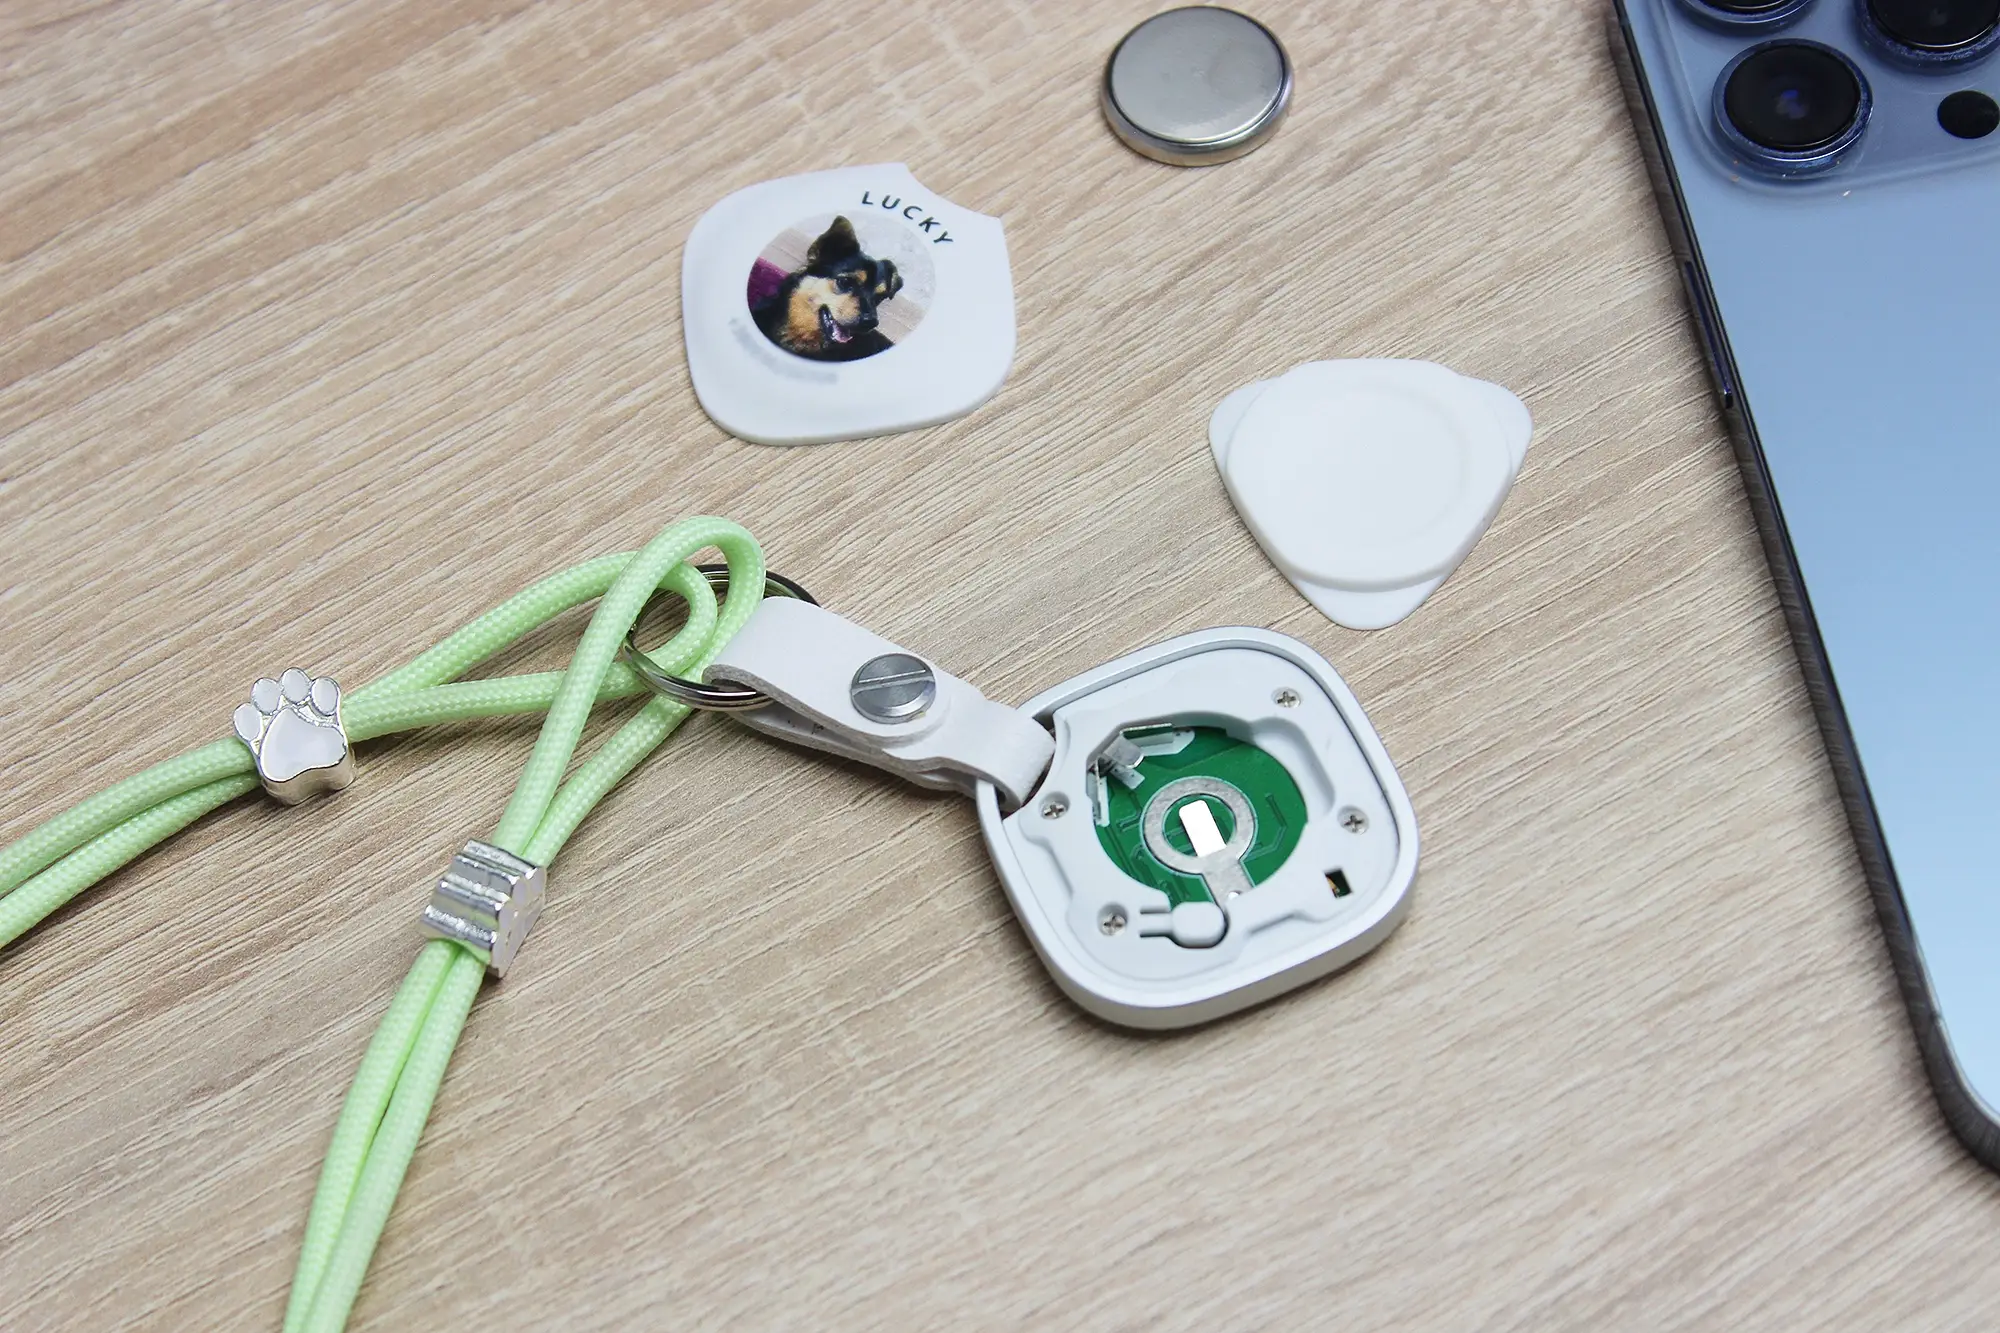 Sleepets Dog Tag Review: Pet Tracker with Apple FindMy Support